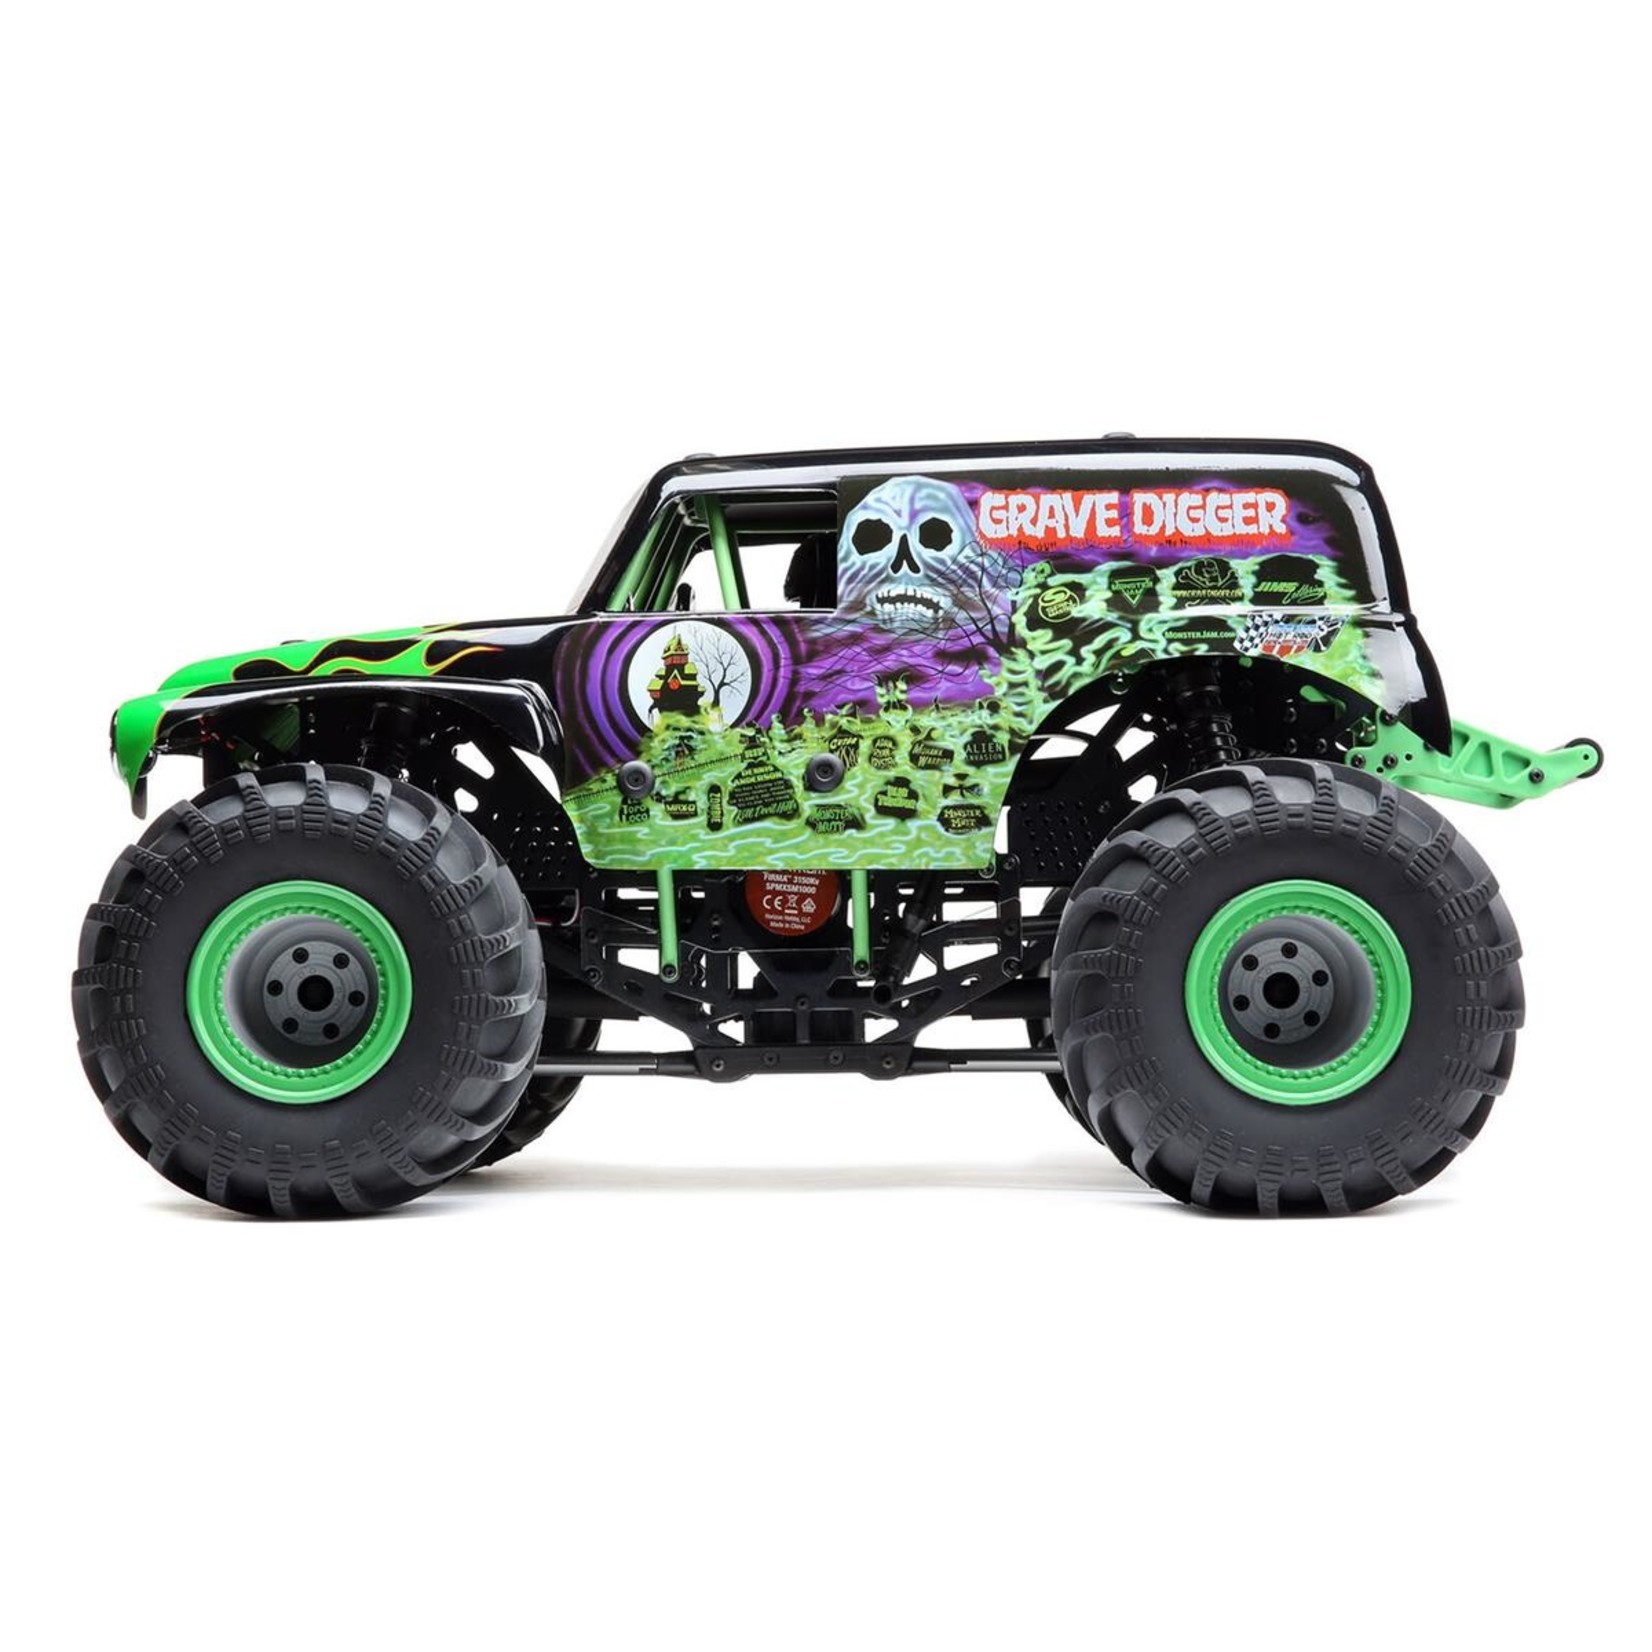 Losi Losi LMT Grave Digger RTR 1/10 4WD Solid Axle Monster Truck w/DX3 2.4GHz Radio #LOS04021T1